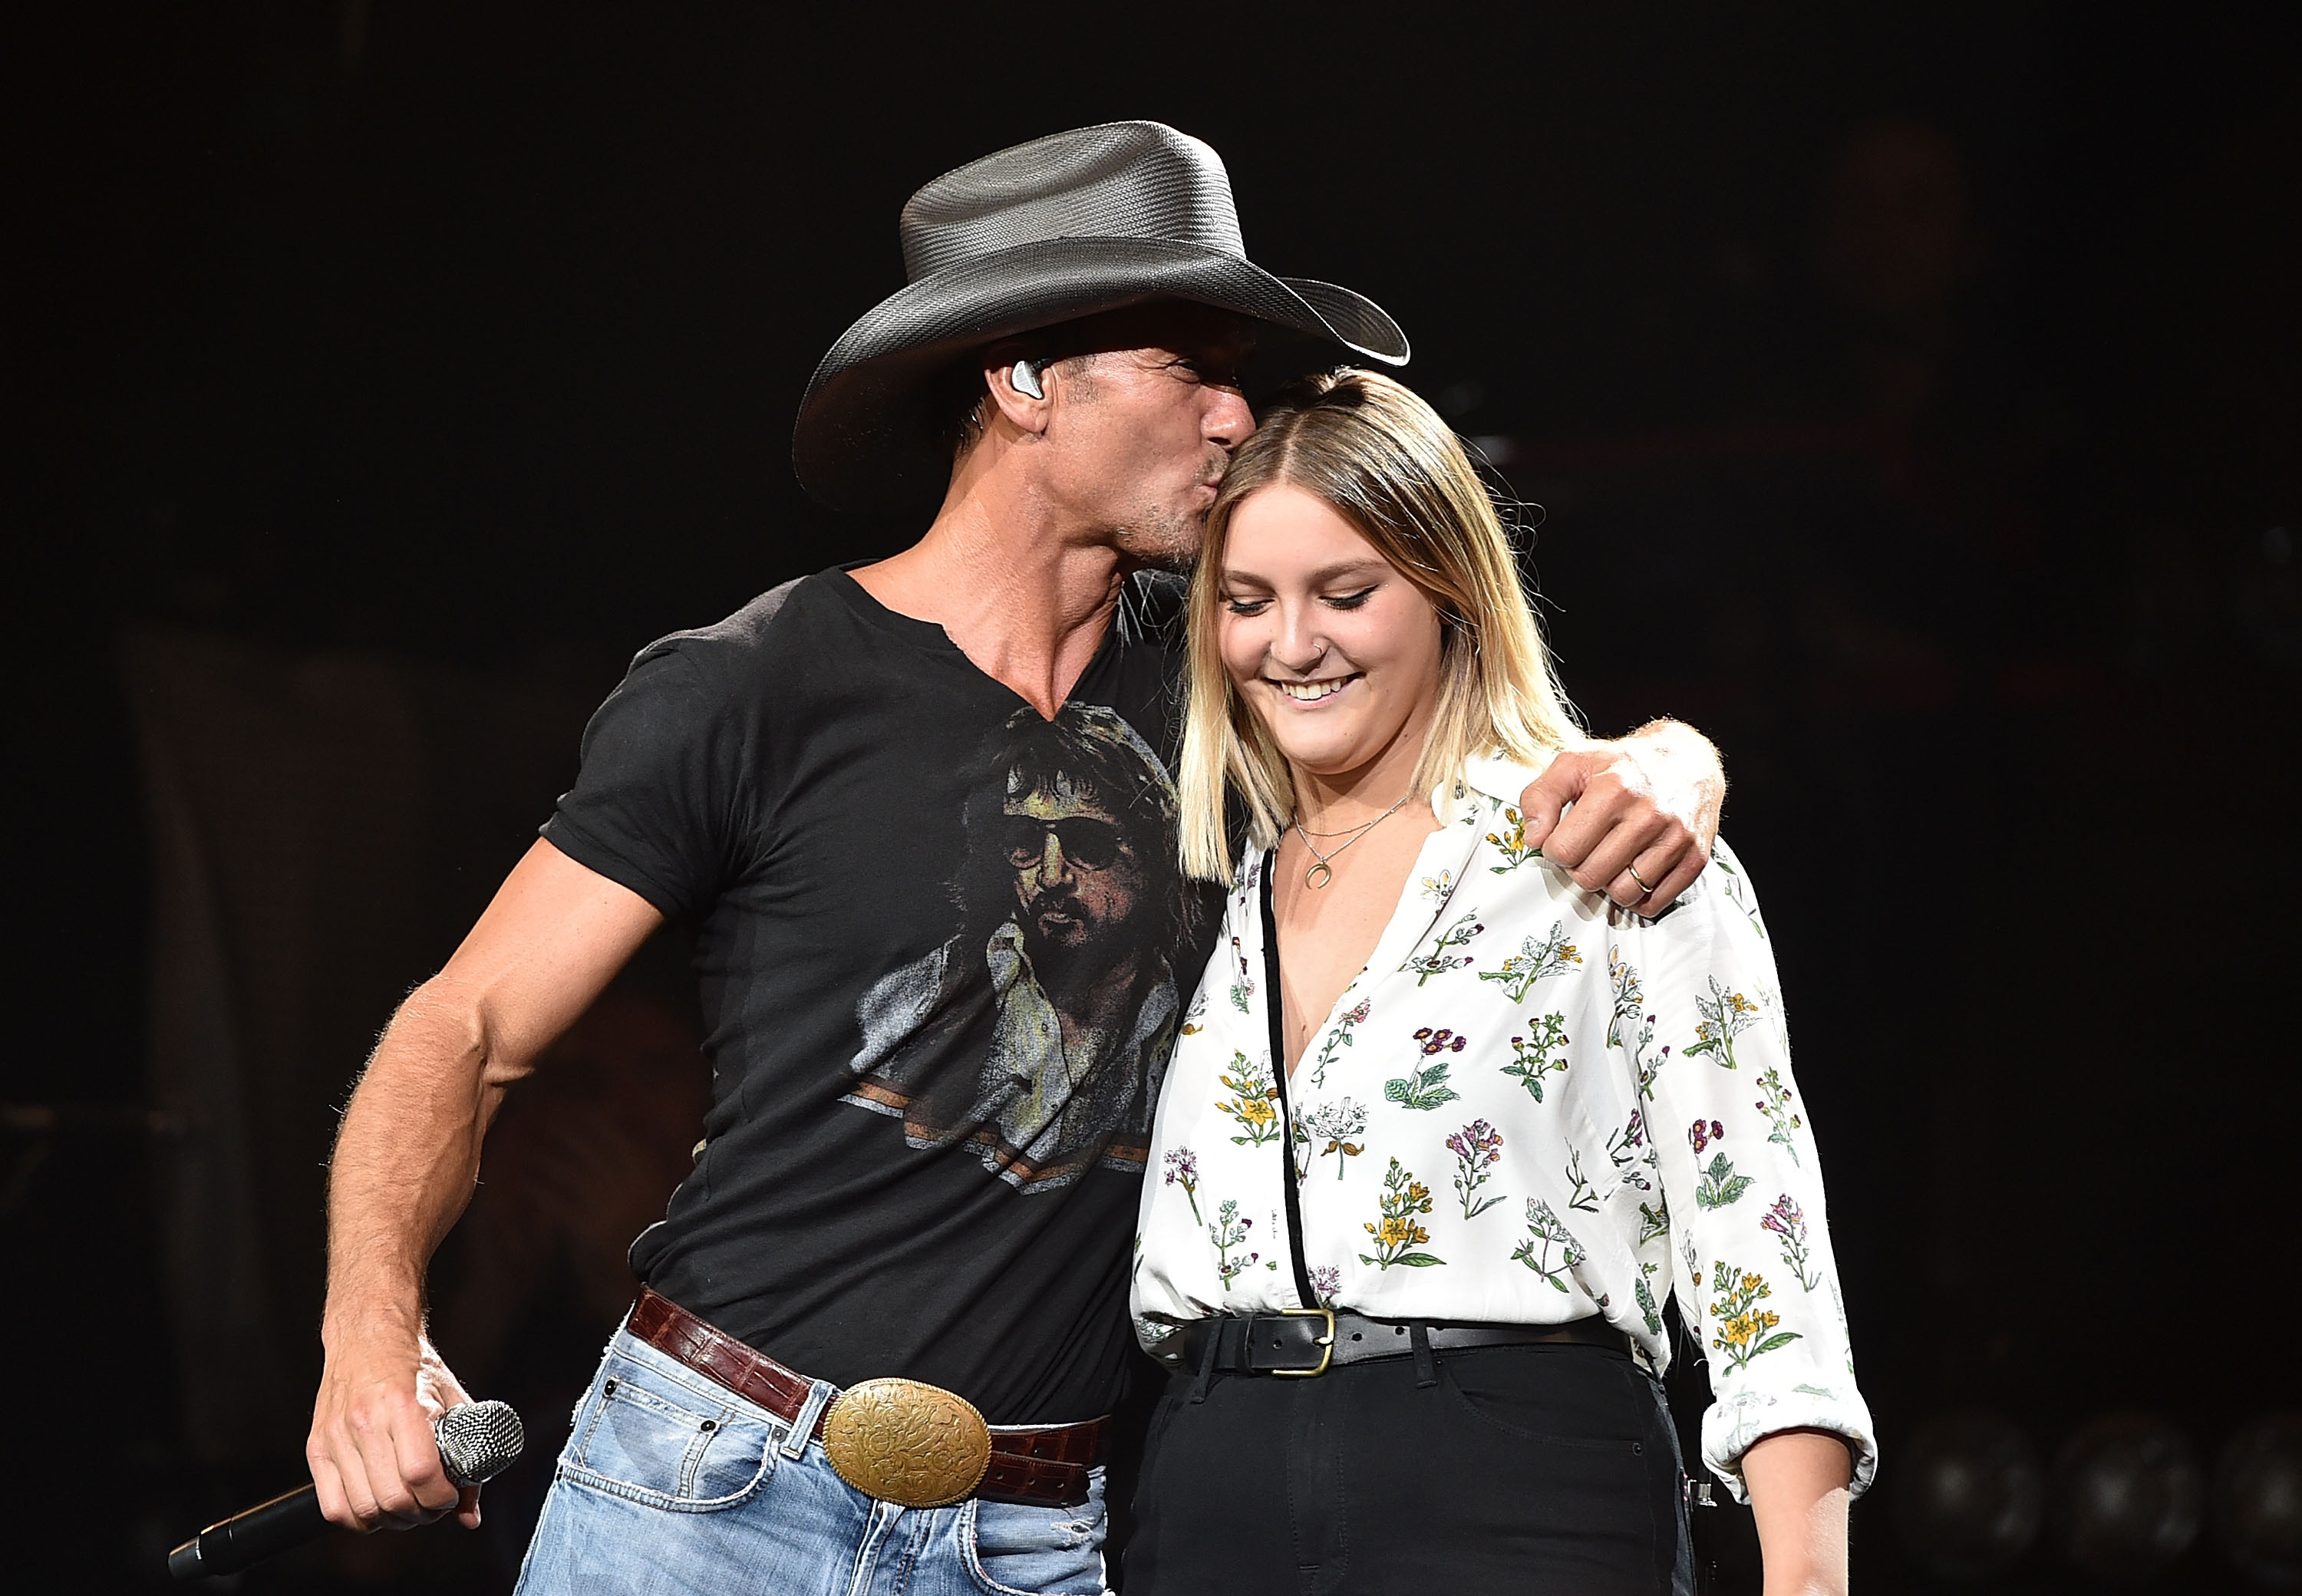 Tim McGraw performs with his daughter Gracie McGraw on the "Shotgun Rider" tour at Bridgestone Arena on August 15, 2015, in Nashville, Tennessee. | Source: Getty Images